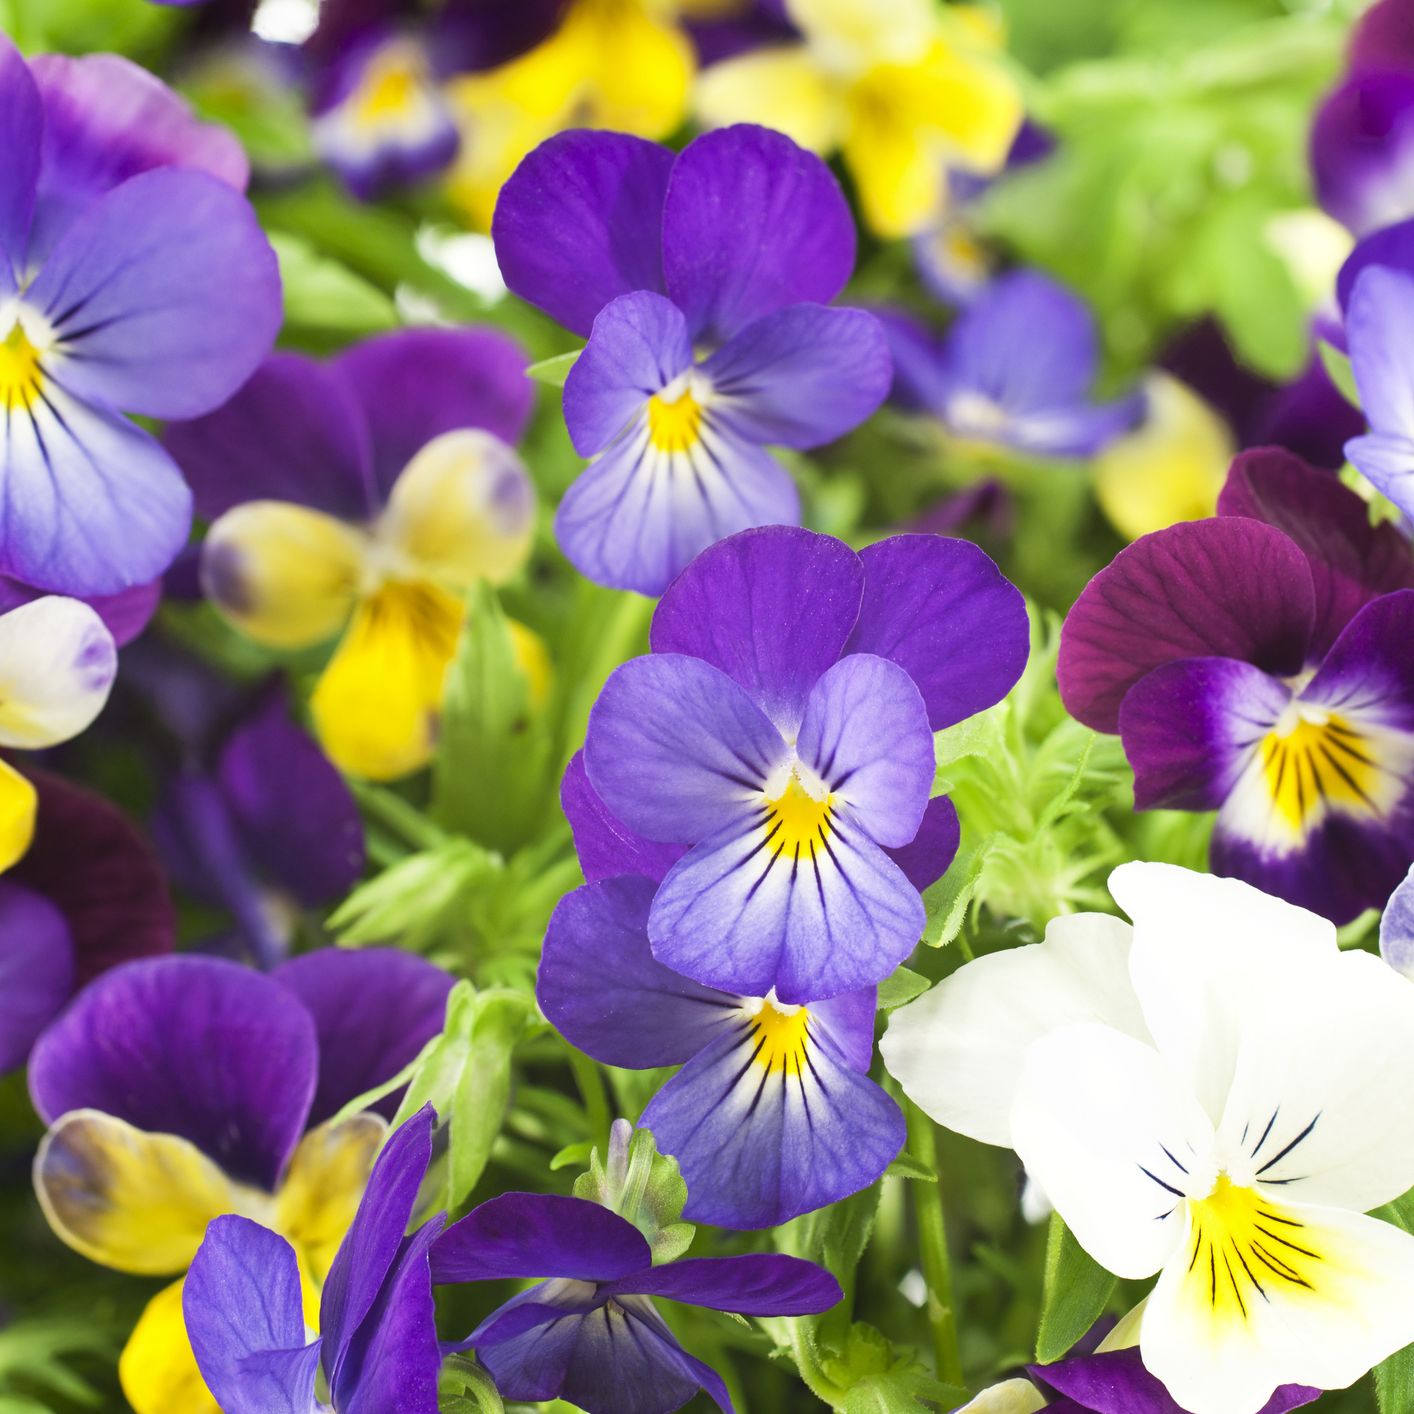 How to sow pansies